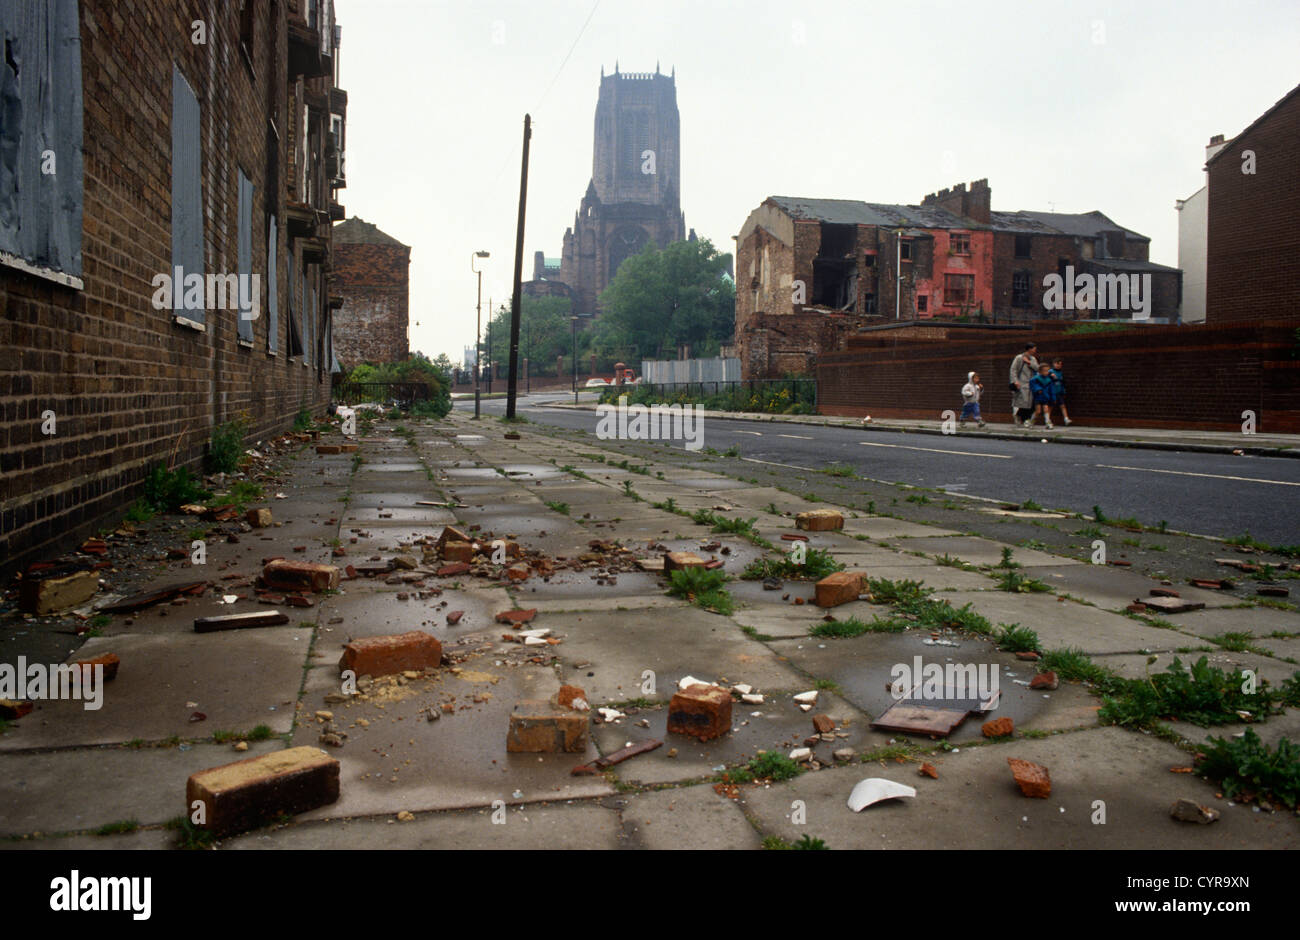 A low, wide landscape of dereliction and poverty during the early 1990s in the city of Liverpool, England. Stock Photo